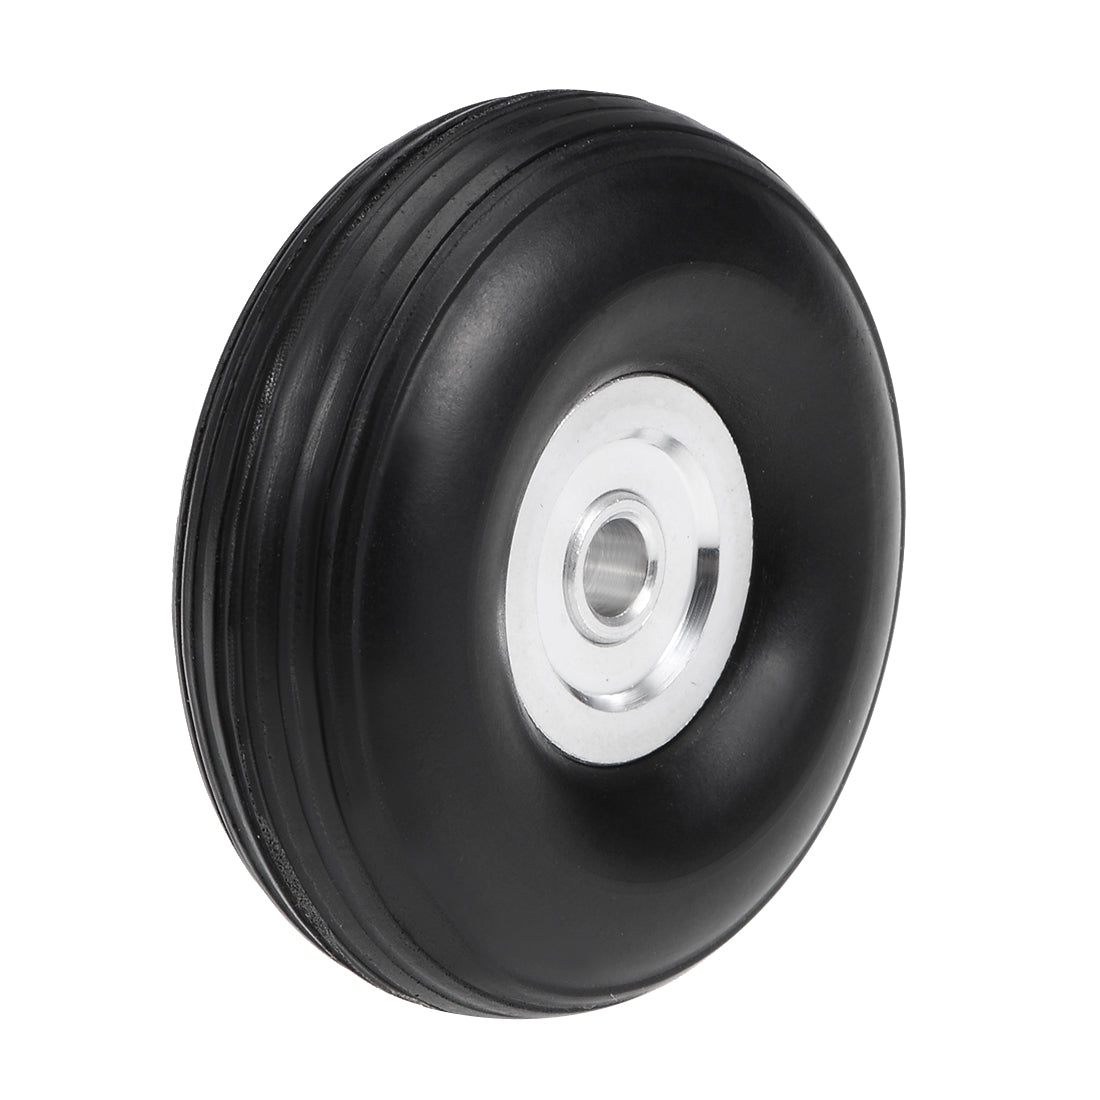 uxcell Uxcell Tire and Wheel Sets for RC Car Airplane,PU Sponge Tire with Aluminum Alloy Hub,1.5"